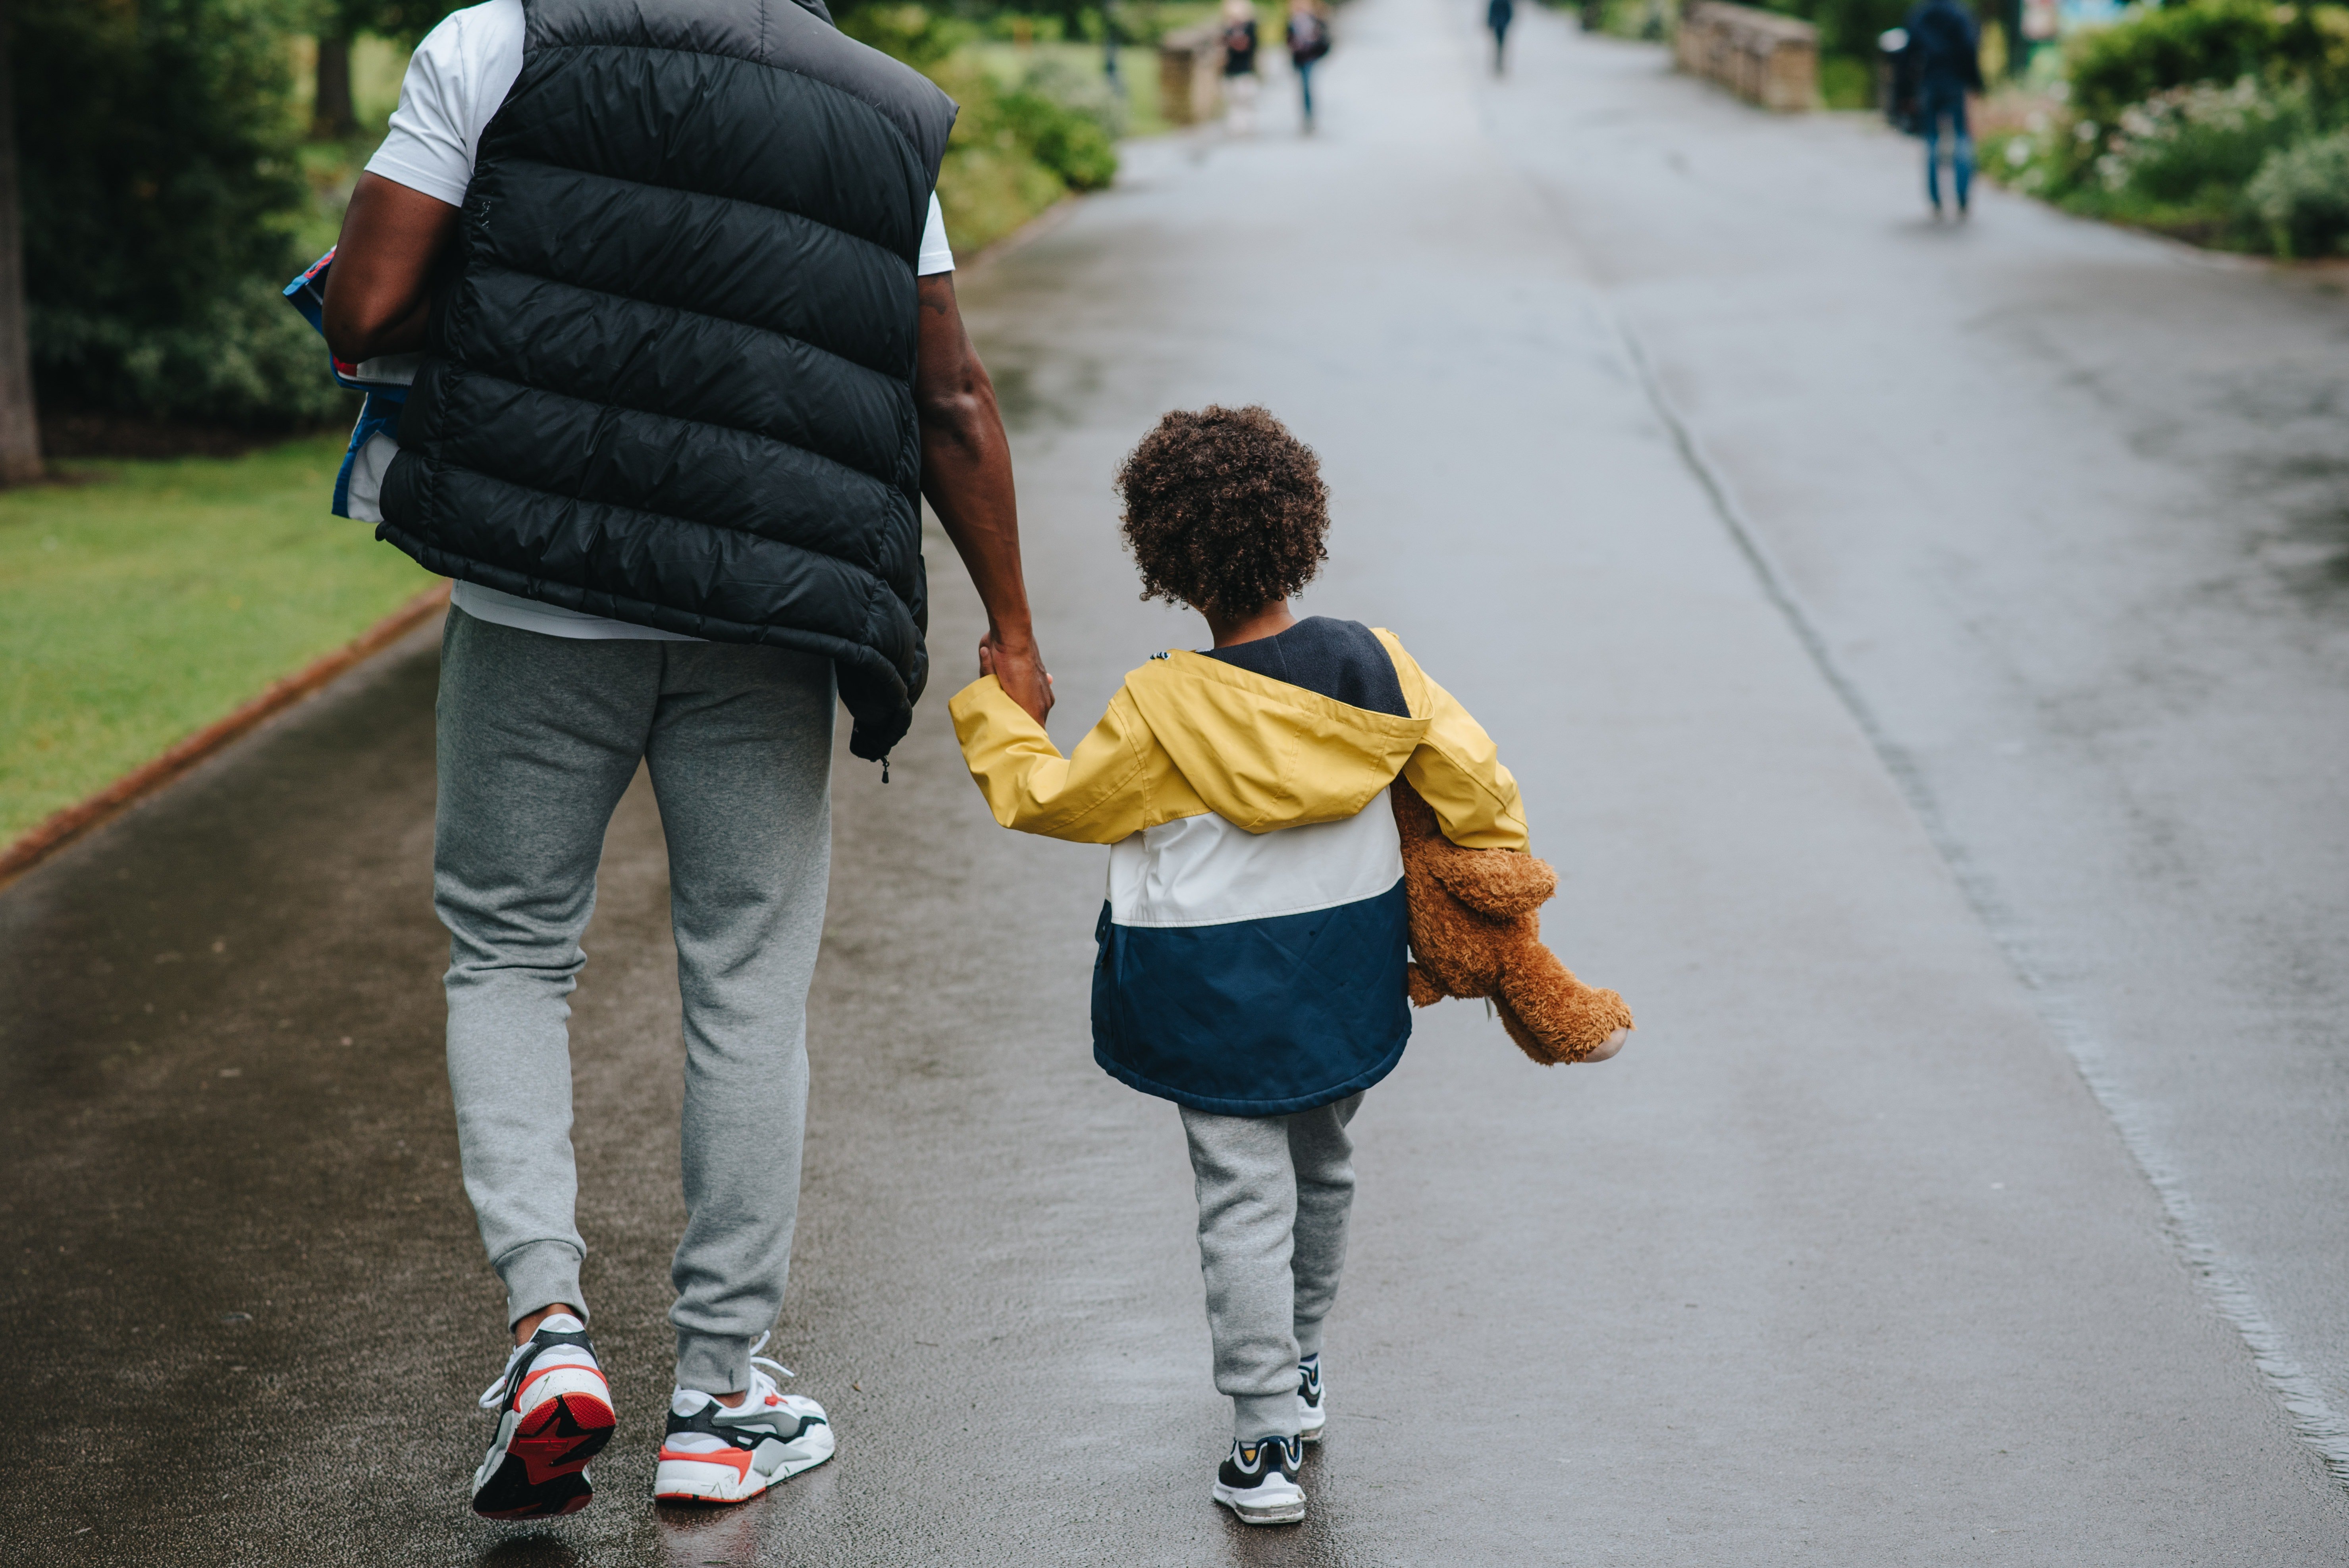 The boy is genetically OP's son & the dad couldn't be more relieved | Photo: Pexels